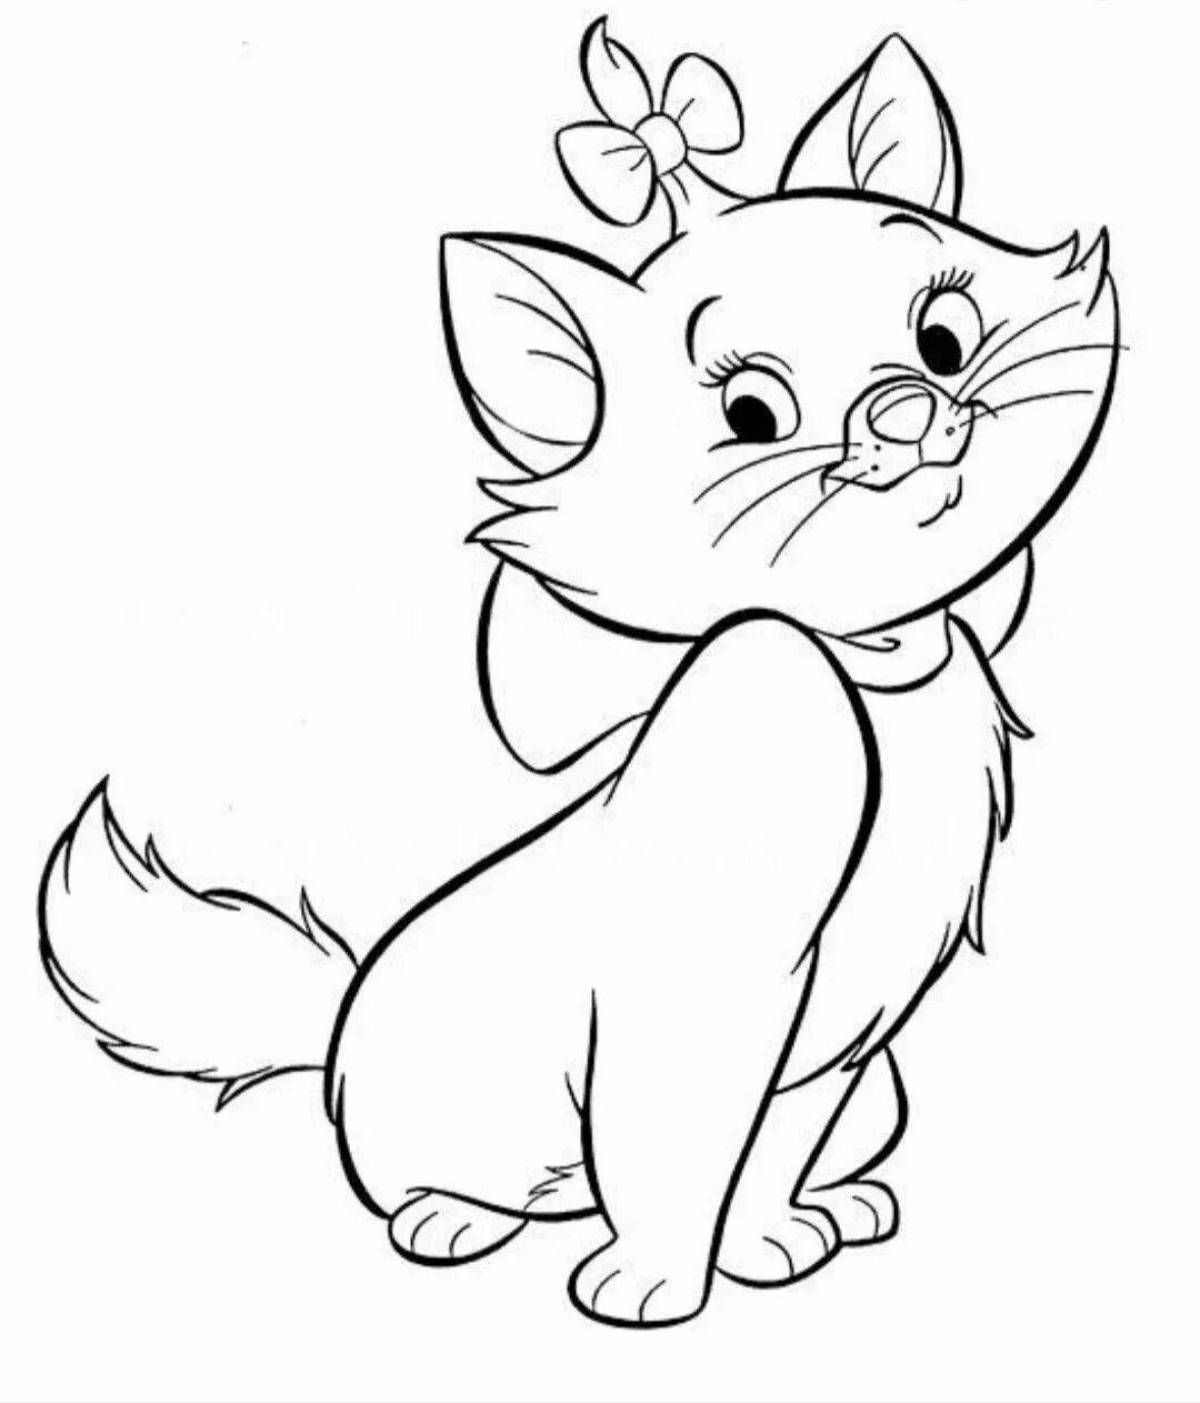 Graceful cat coloring book for kids